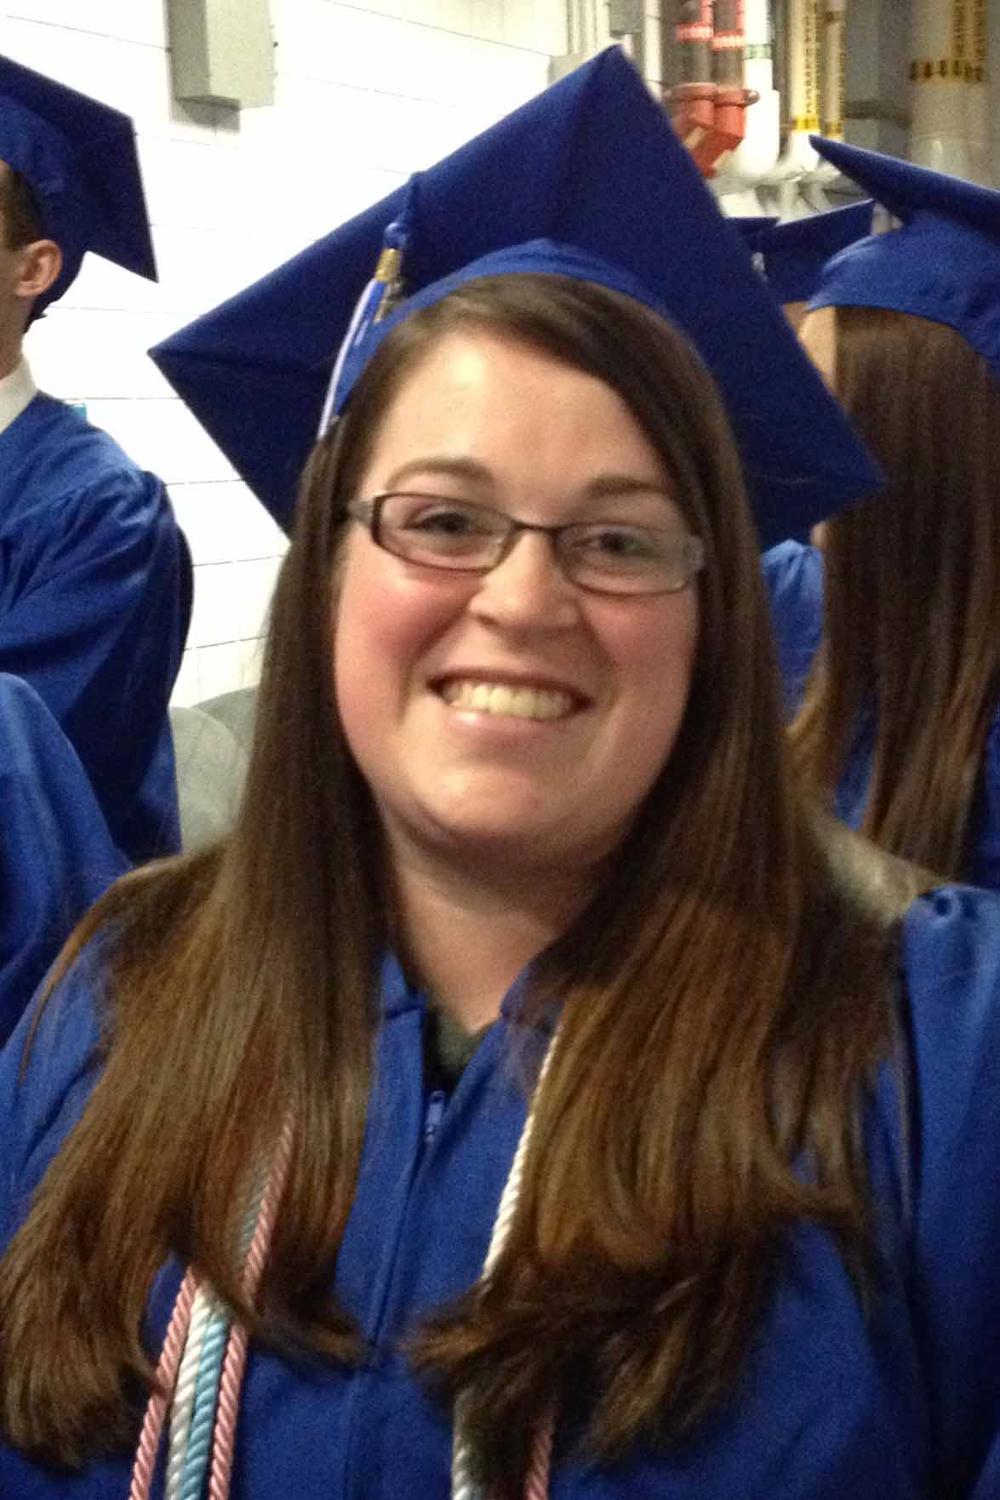 Photo of Ashley in cap and gown before Fall 2016 Commencement Ceremony.